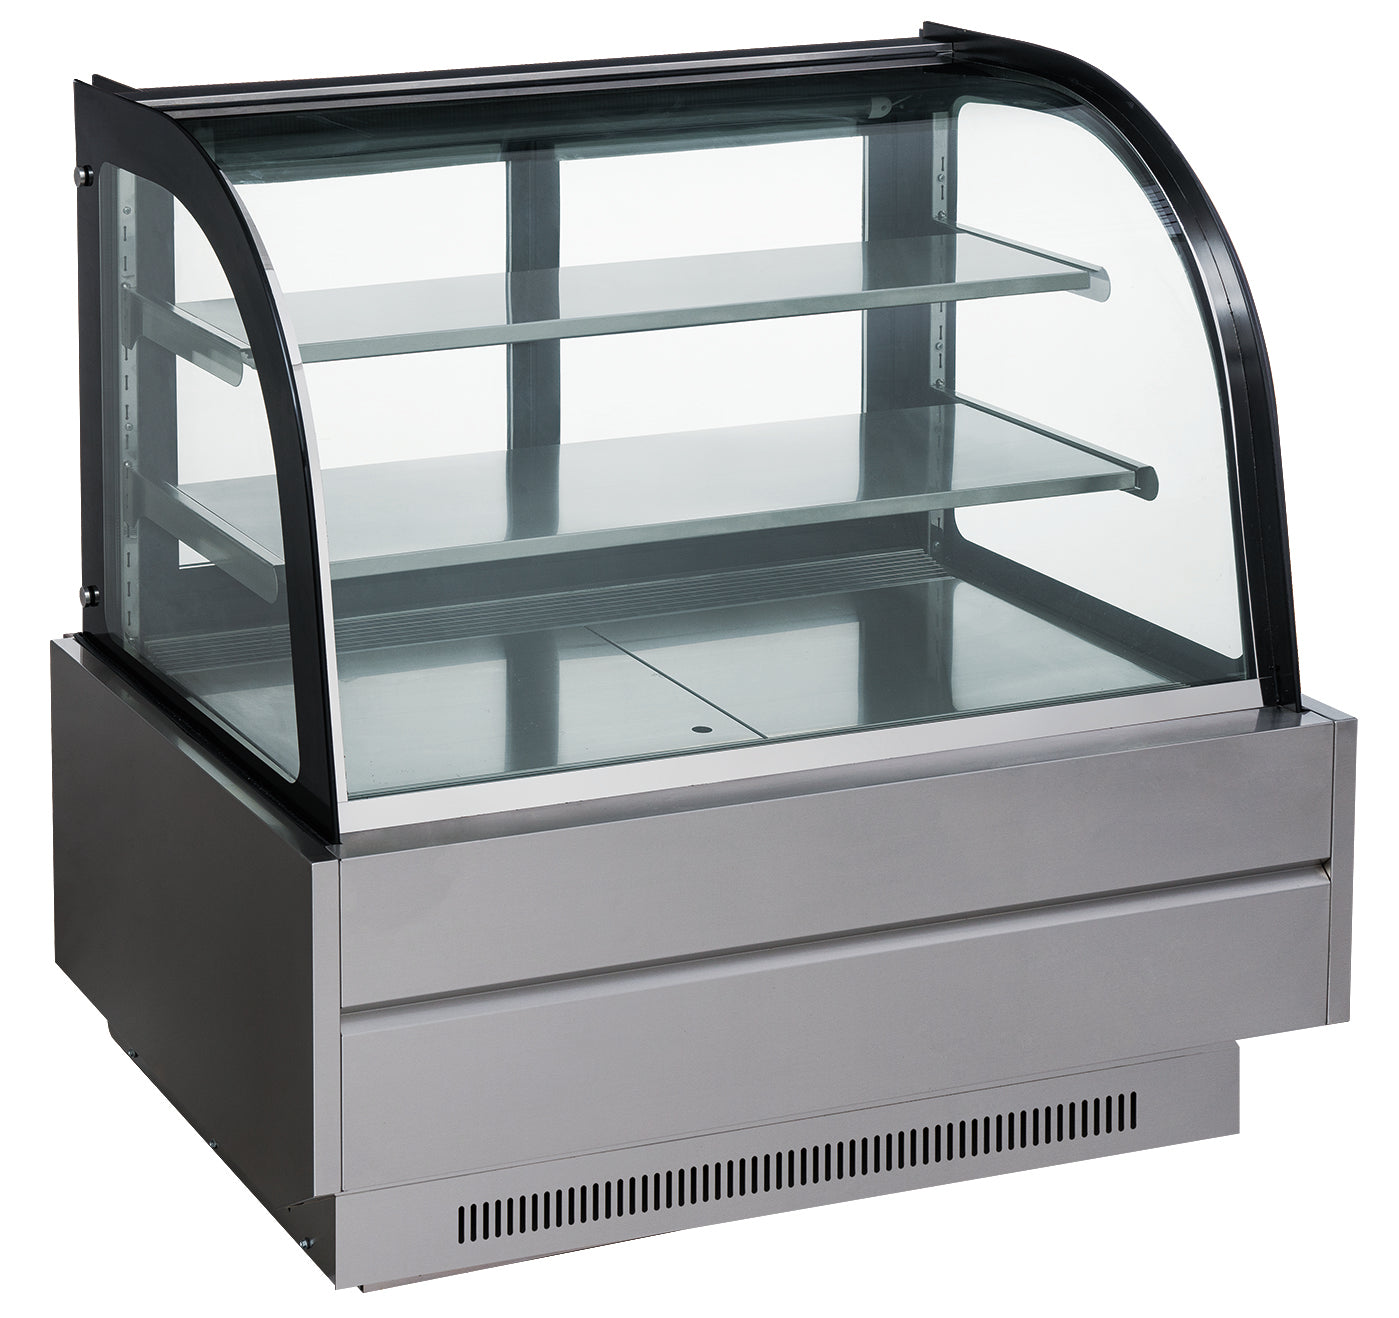 Chef AAA - CV-120, Commercial 48" Display Case Refrigerator Showcase (4 Feet) Pastry Bakery